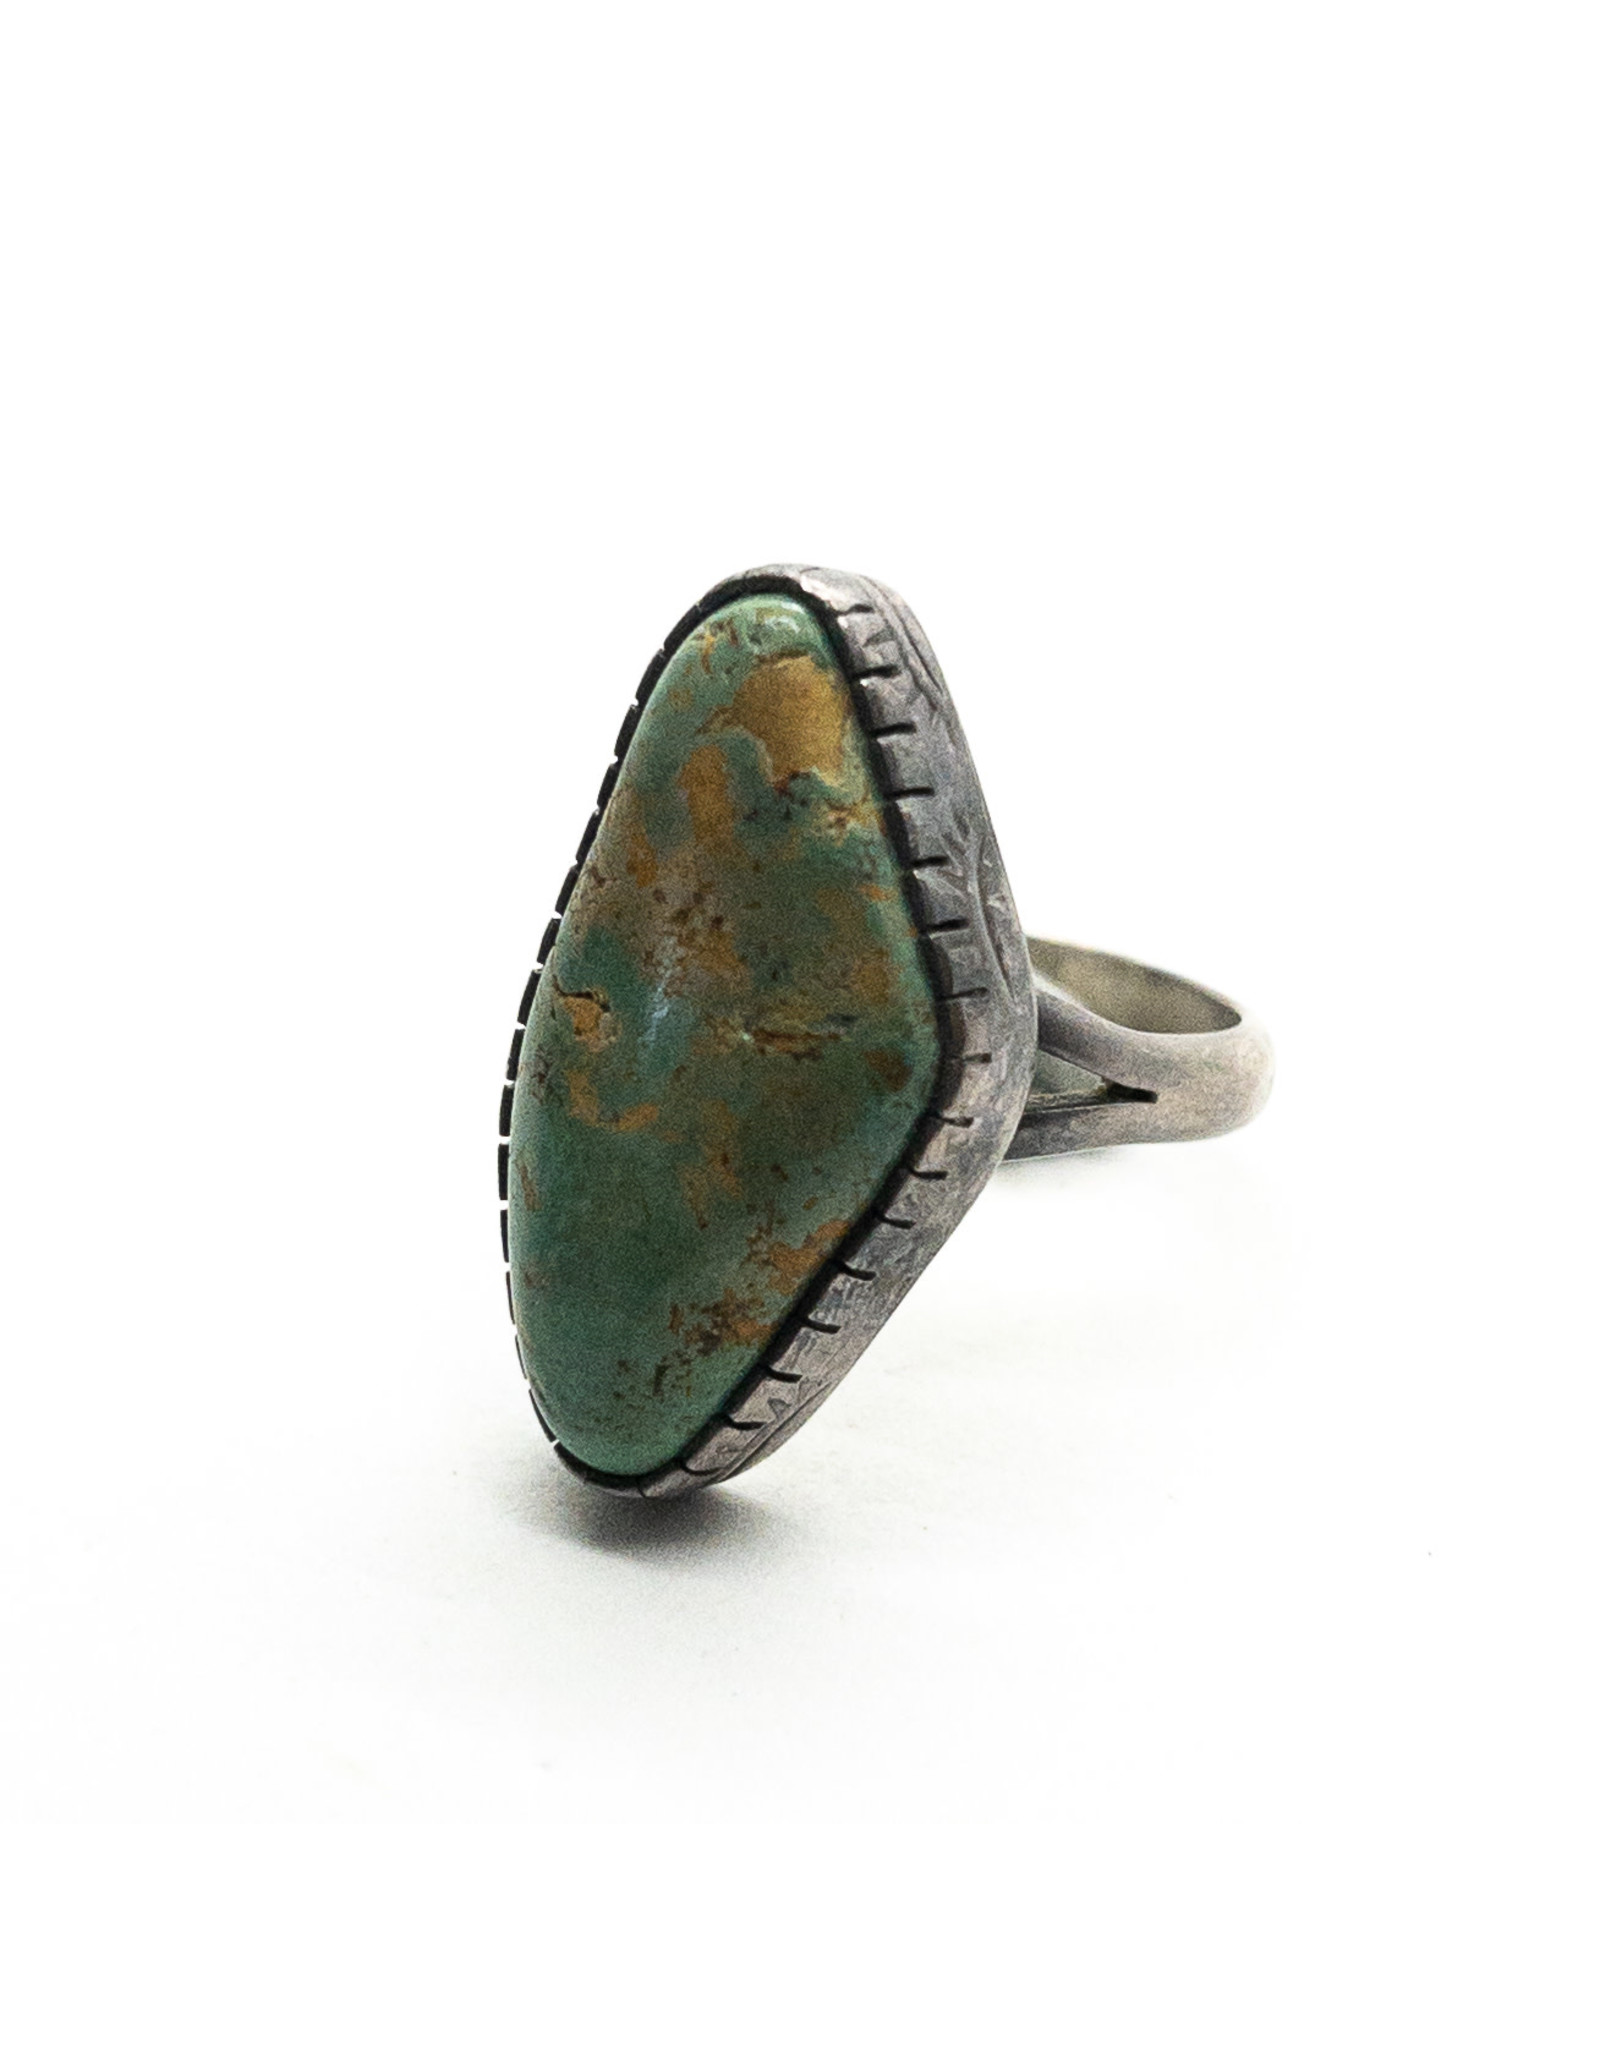 Vintage Southwest-Style Green Turquoise Sterling Ring